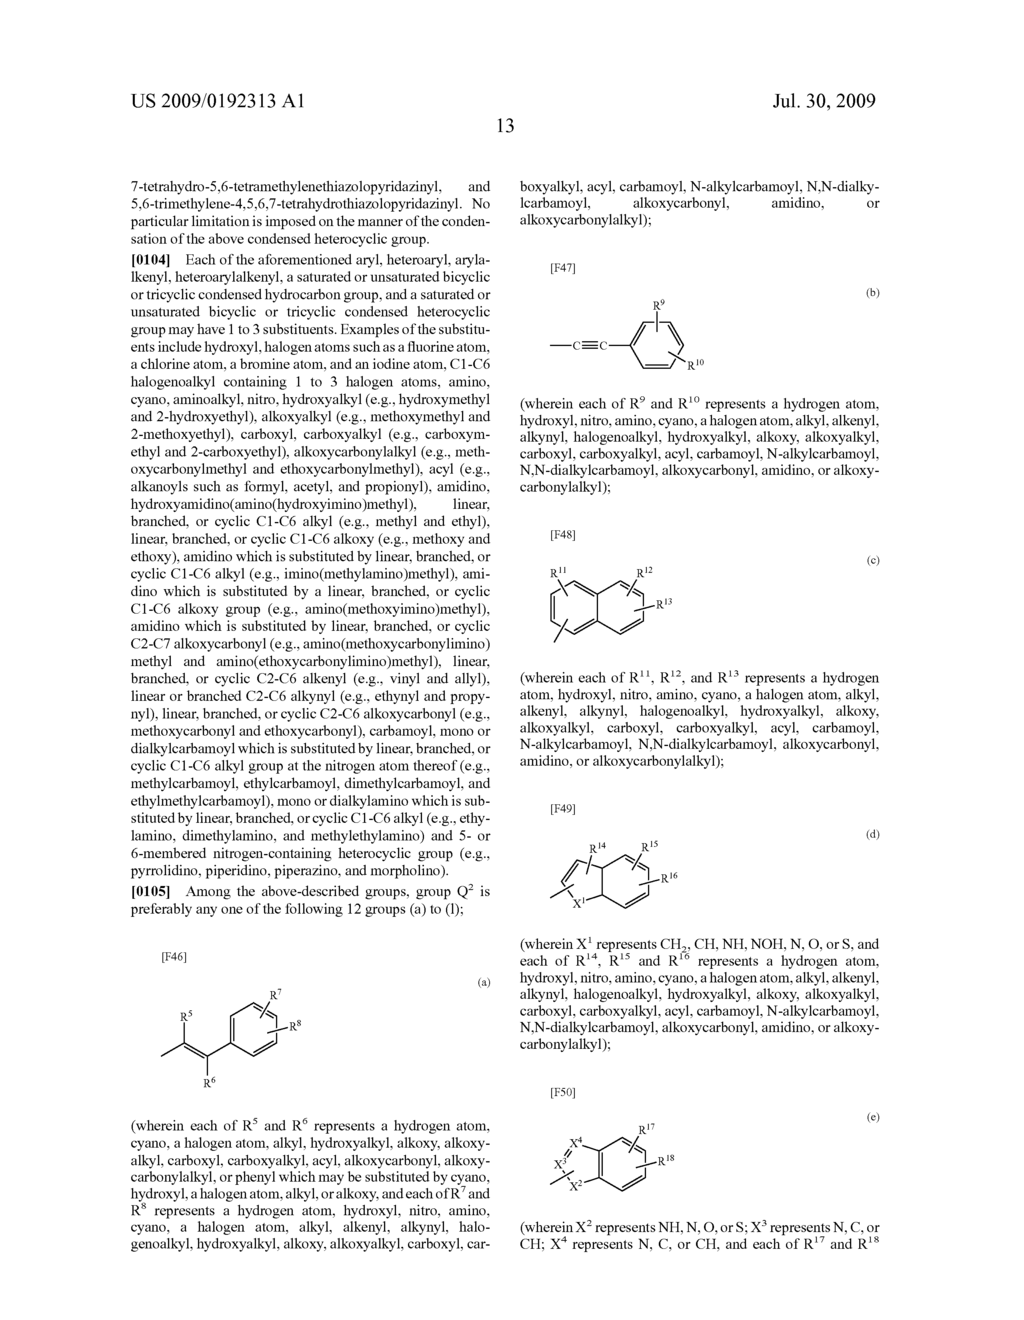 PROCESS FOR PRODUCING 5-METHYL-4,5,6,7-TETRAHYDROTHIAZOLO[5,4-c]PYRIDINE-2-CARBOXYLIC ACID - diagram, schematic, and image 14